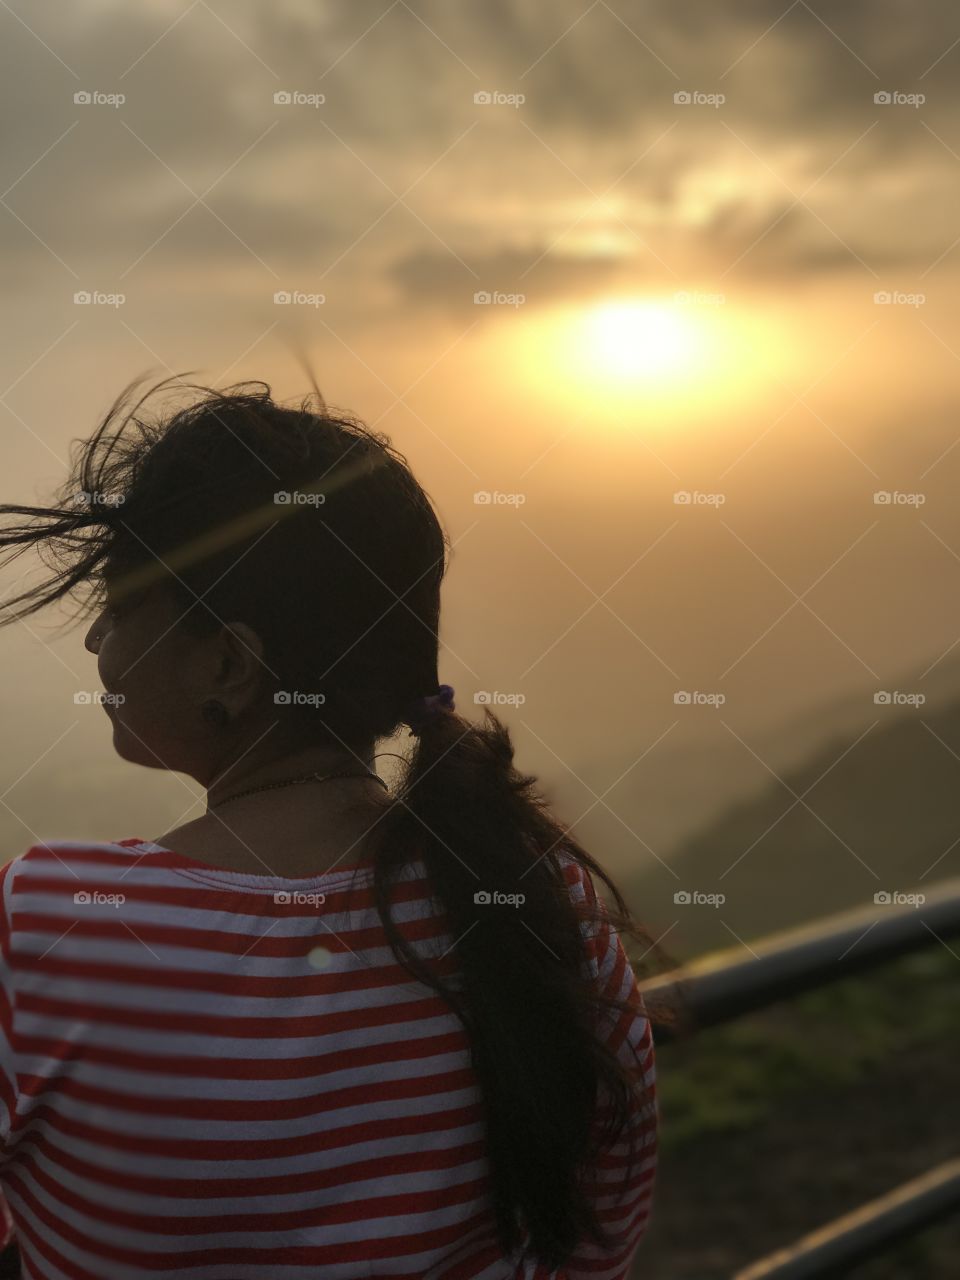 The moment she is standing on hill is the sun set time fresh air and mood is happy air passing over. The best moment I have found.